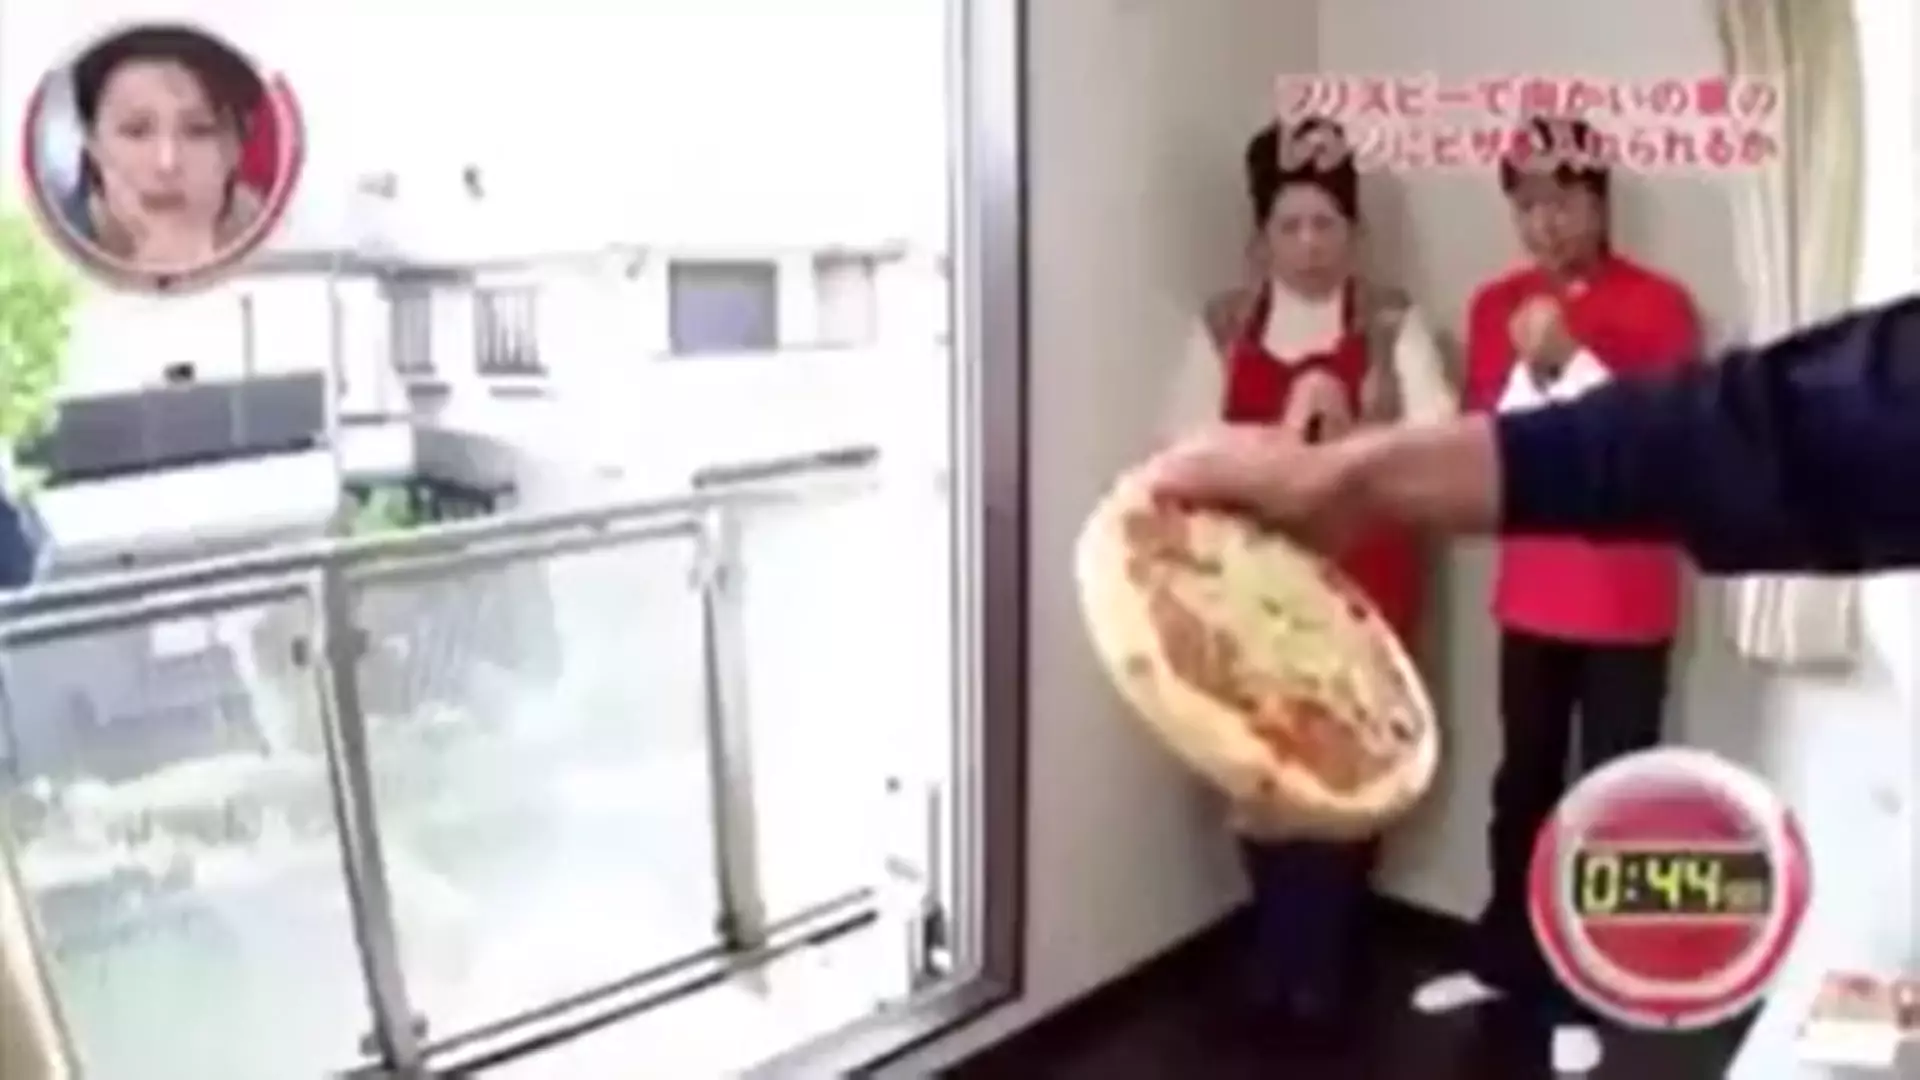 Video Shows Man Throwing Pizza Into Another Apartment's Microwave